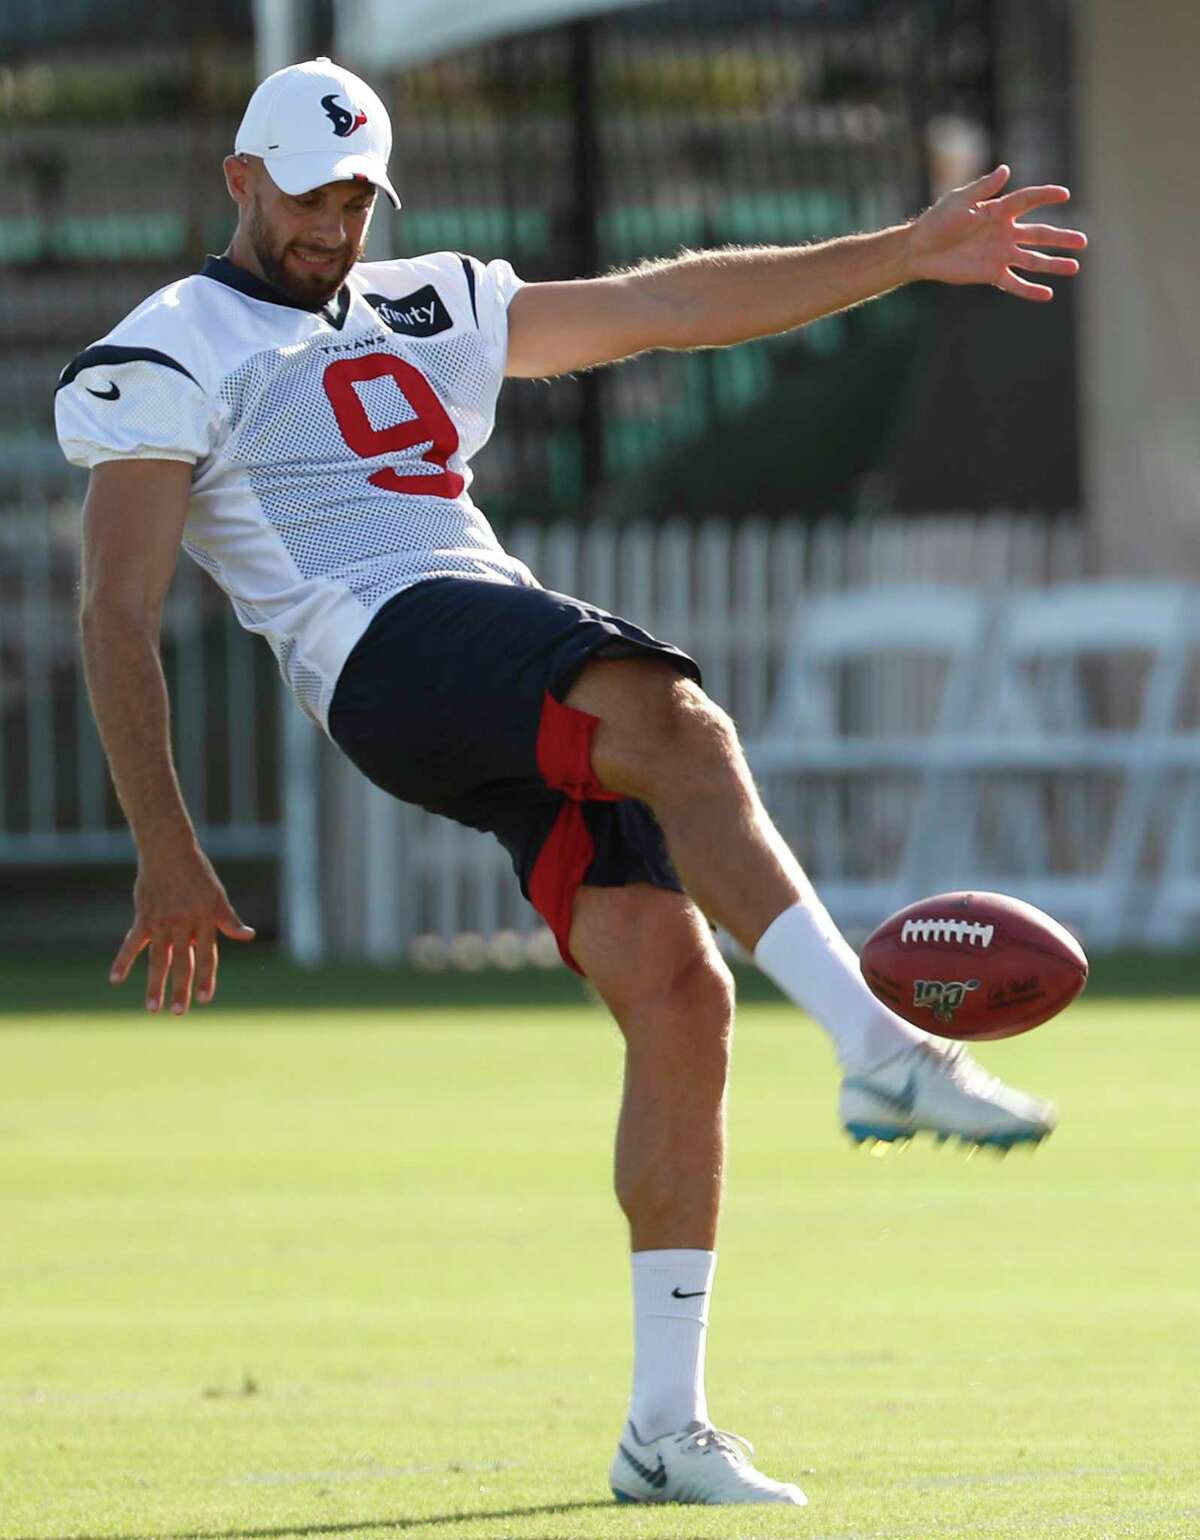 Houston Texans punter Bryan Anger punts the ball during training camp at the Methodist Training Center on Monday, July 29, 2019, in Houston.